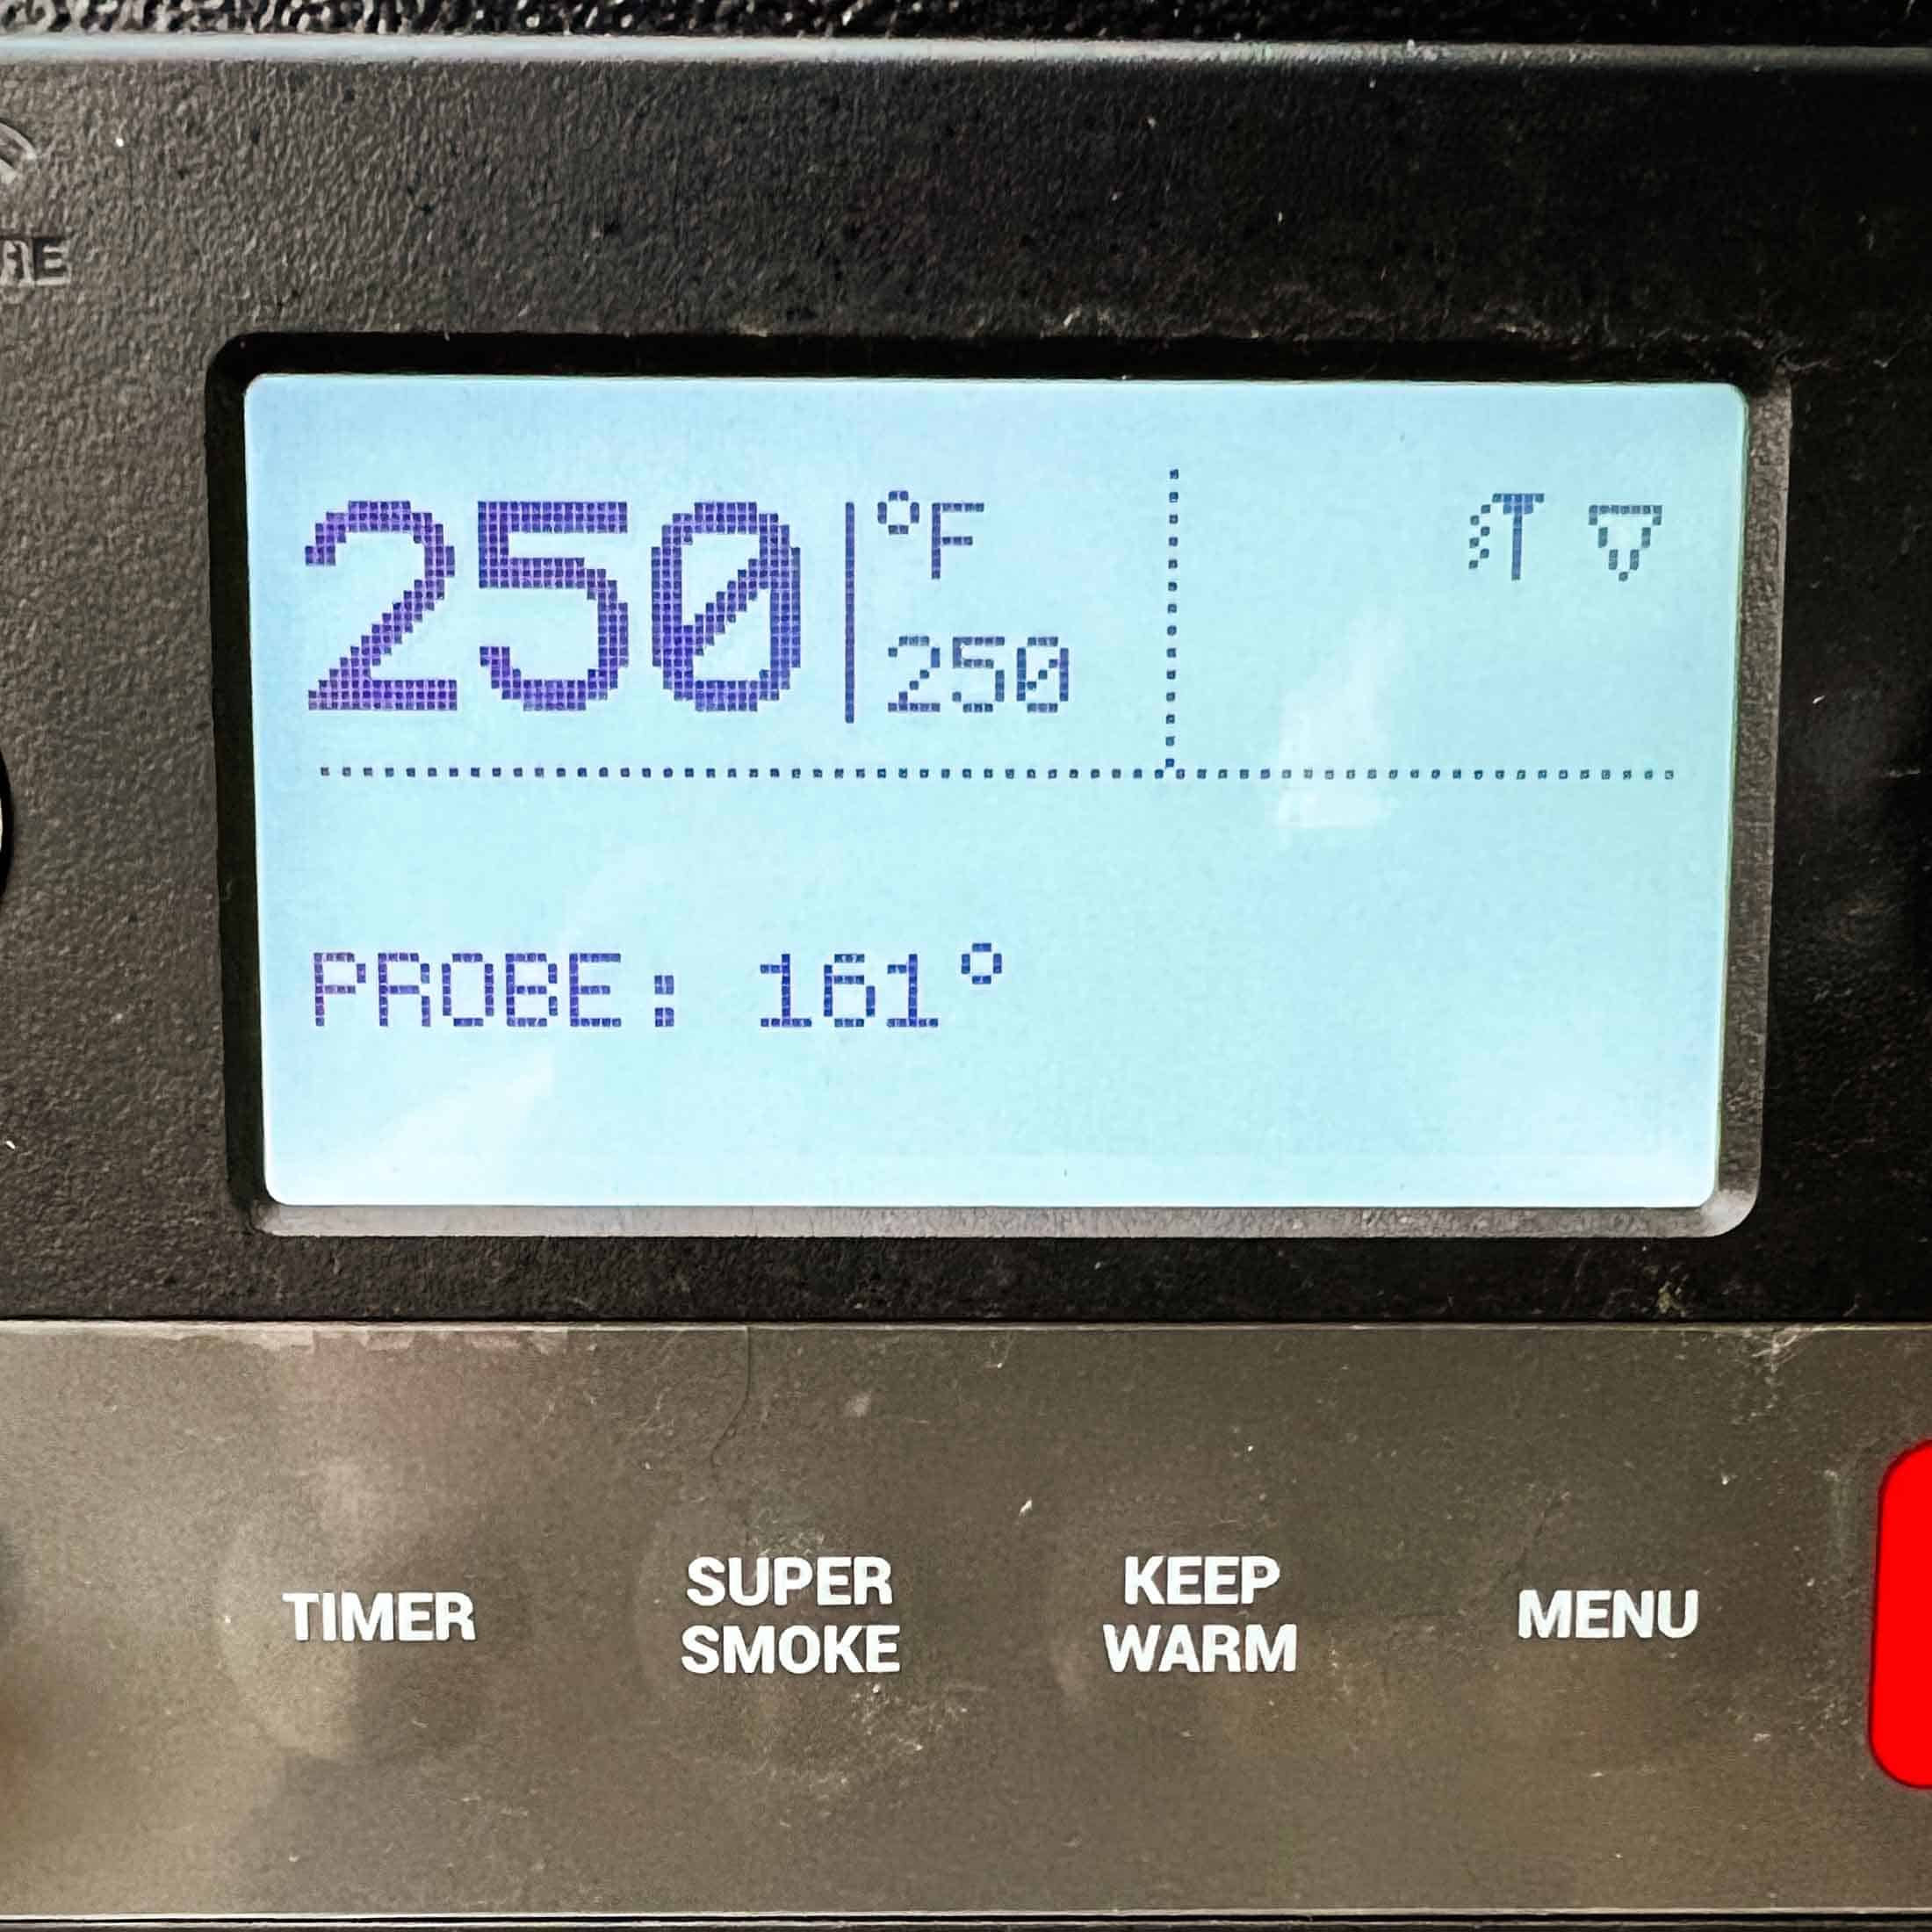 Traeger display screen showing a set temperature of 250 degrees f and internal temp of 161°F.